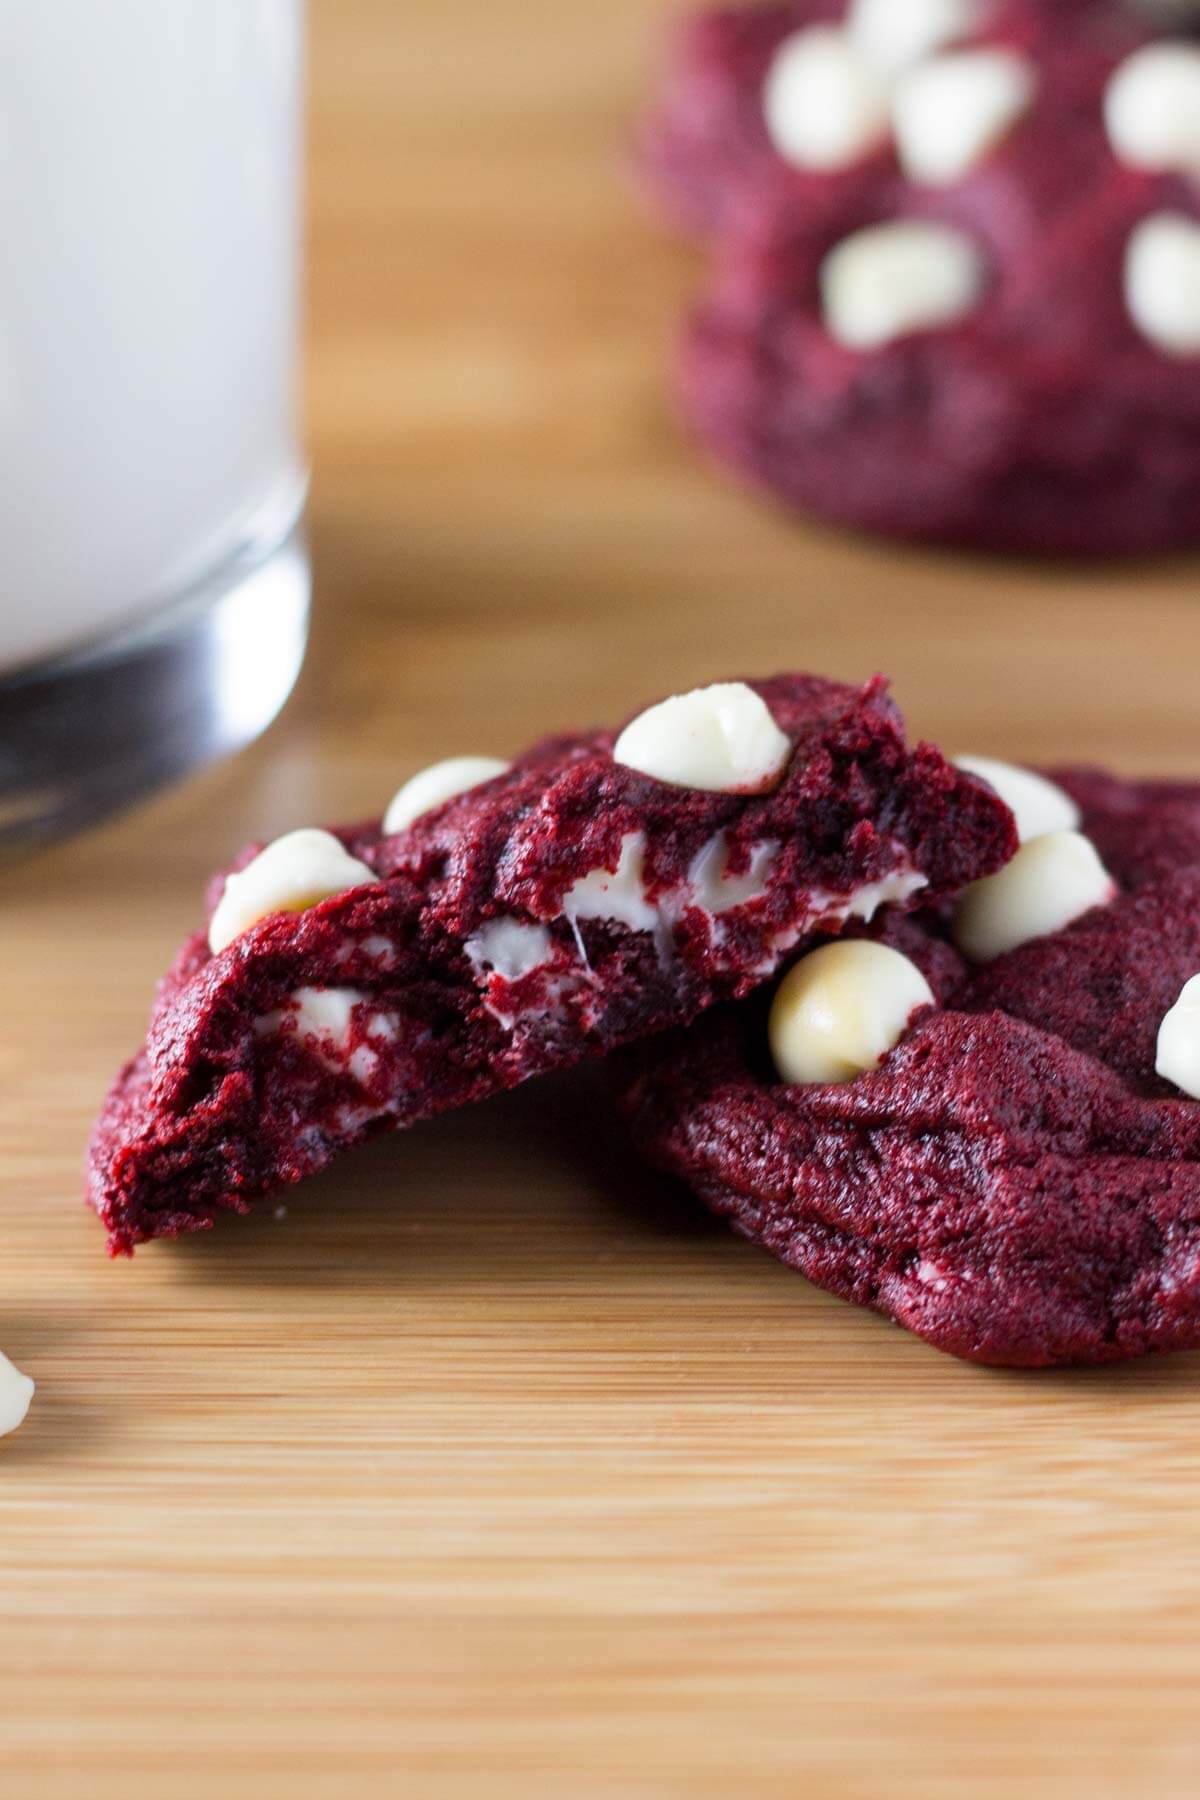 Soft, chewy Red Velvet Chocolate Chip Cookies. With a delicate hint of cocoa & oozing with melted chocolate chips - they're perfectly festive!